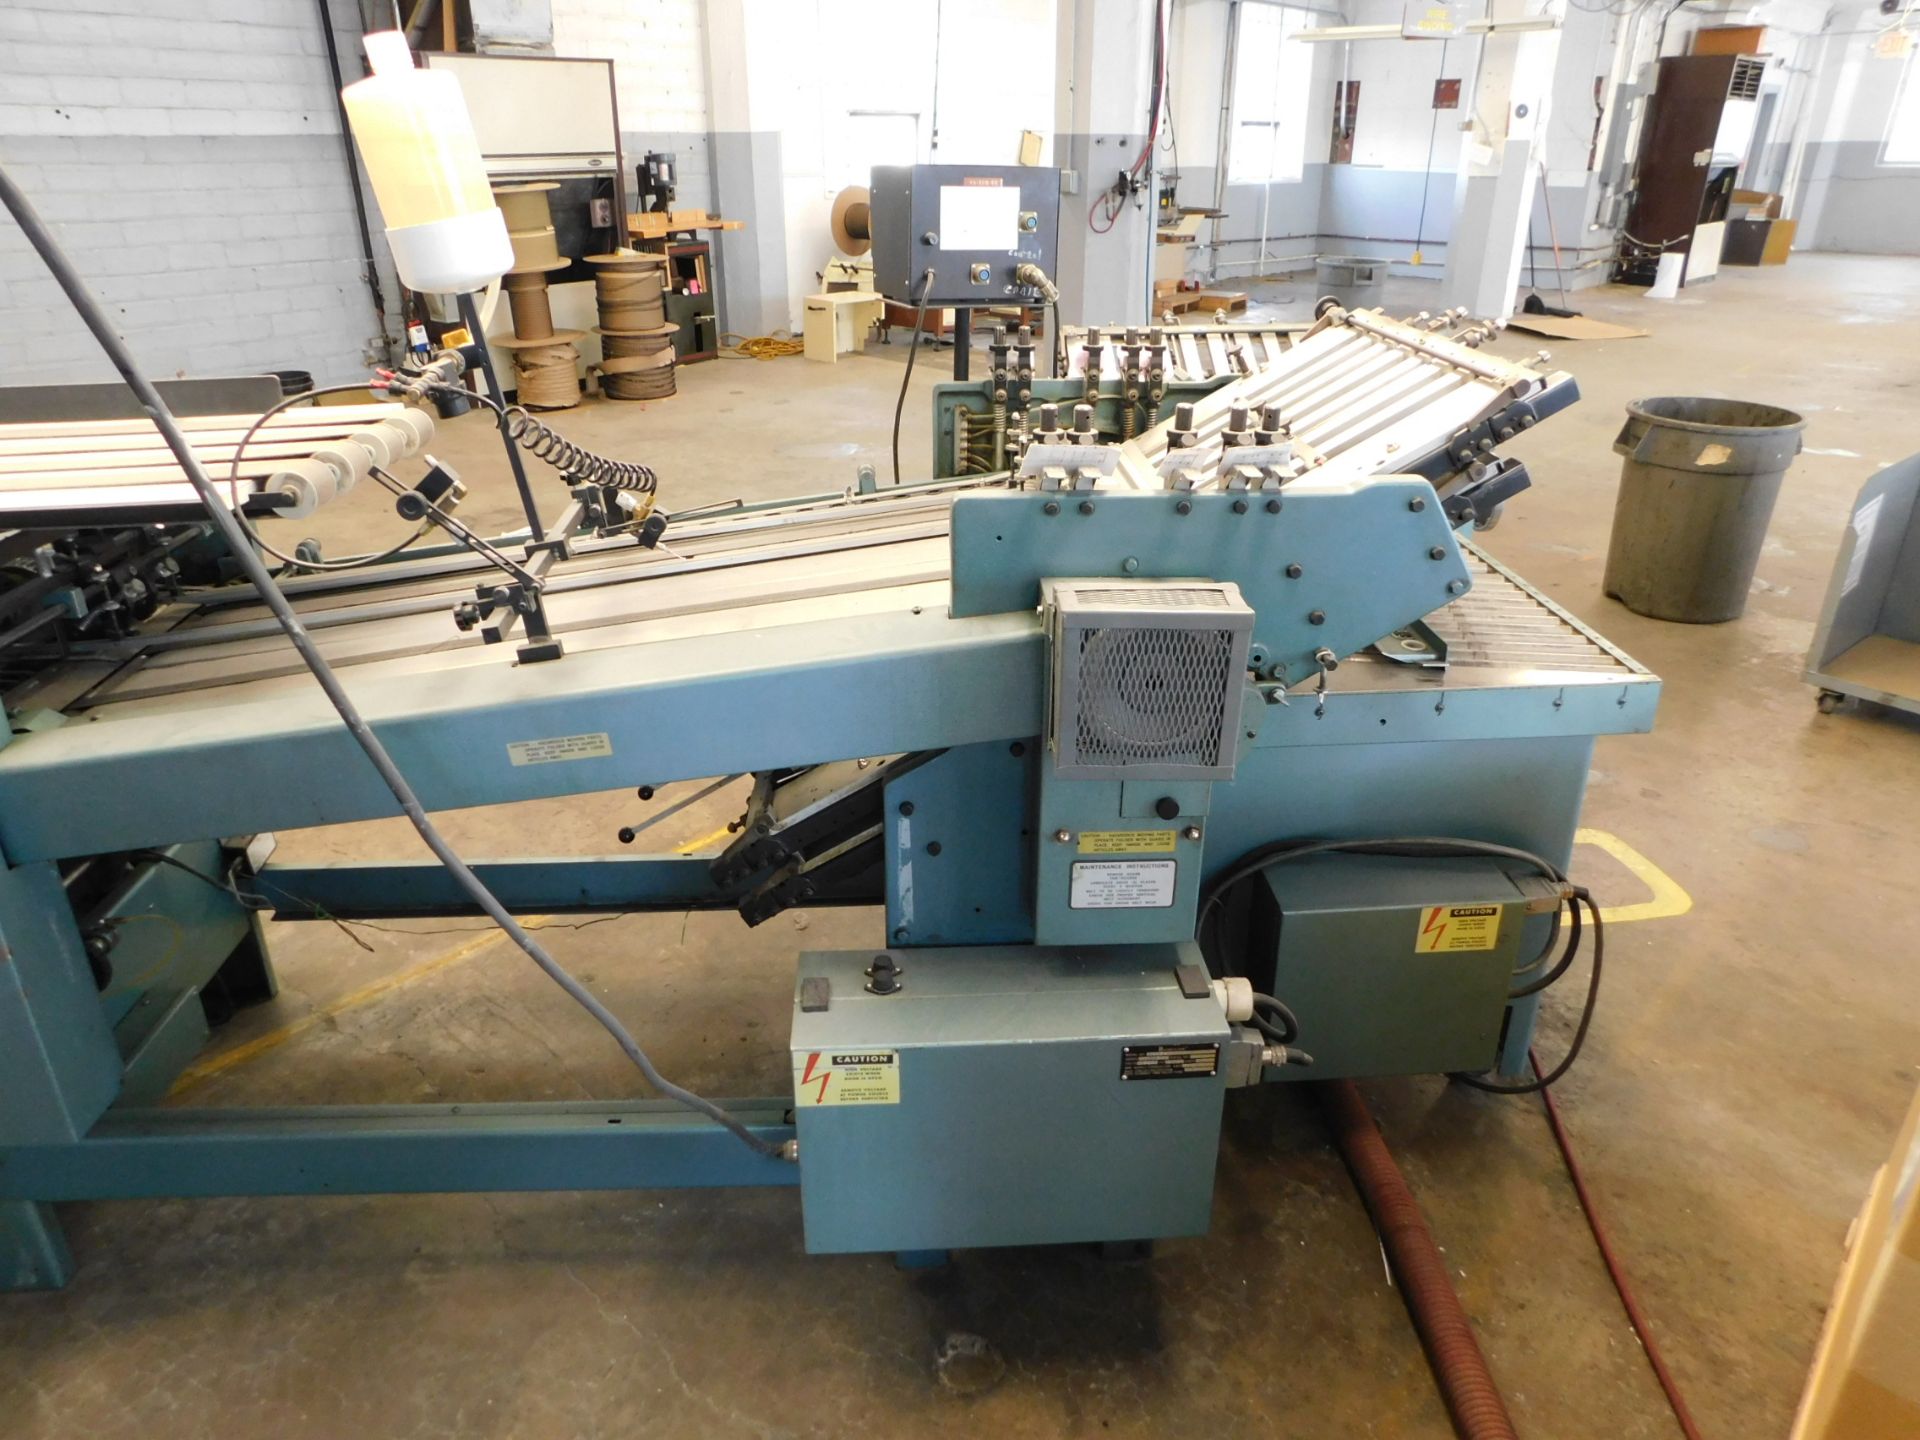 Baumfolder 720 - 20 x 26 700B folder with 8 page unit, includes 700B - 20 x 20 8pp folding unit with - Image 5 of 7